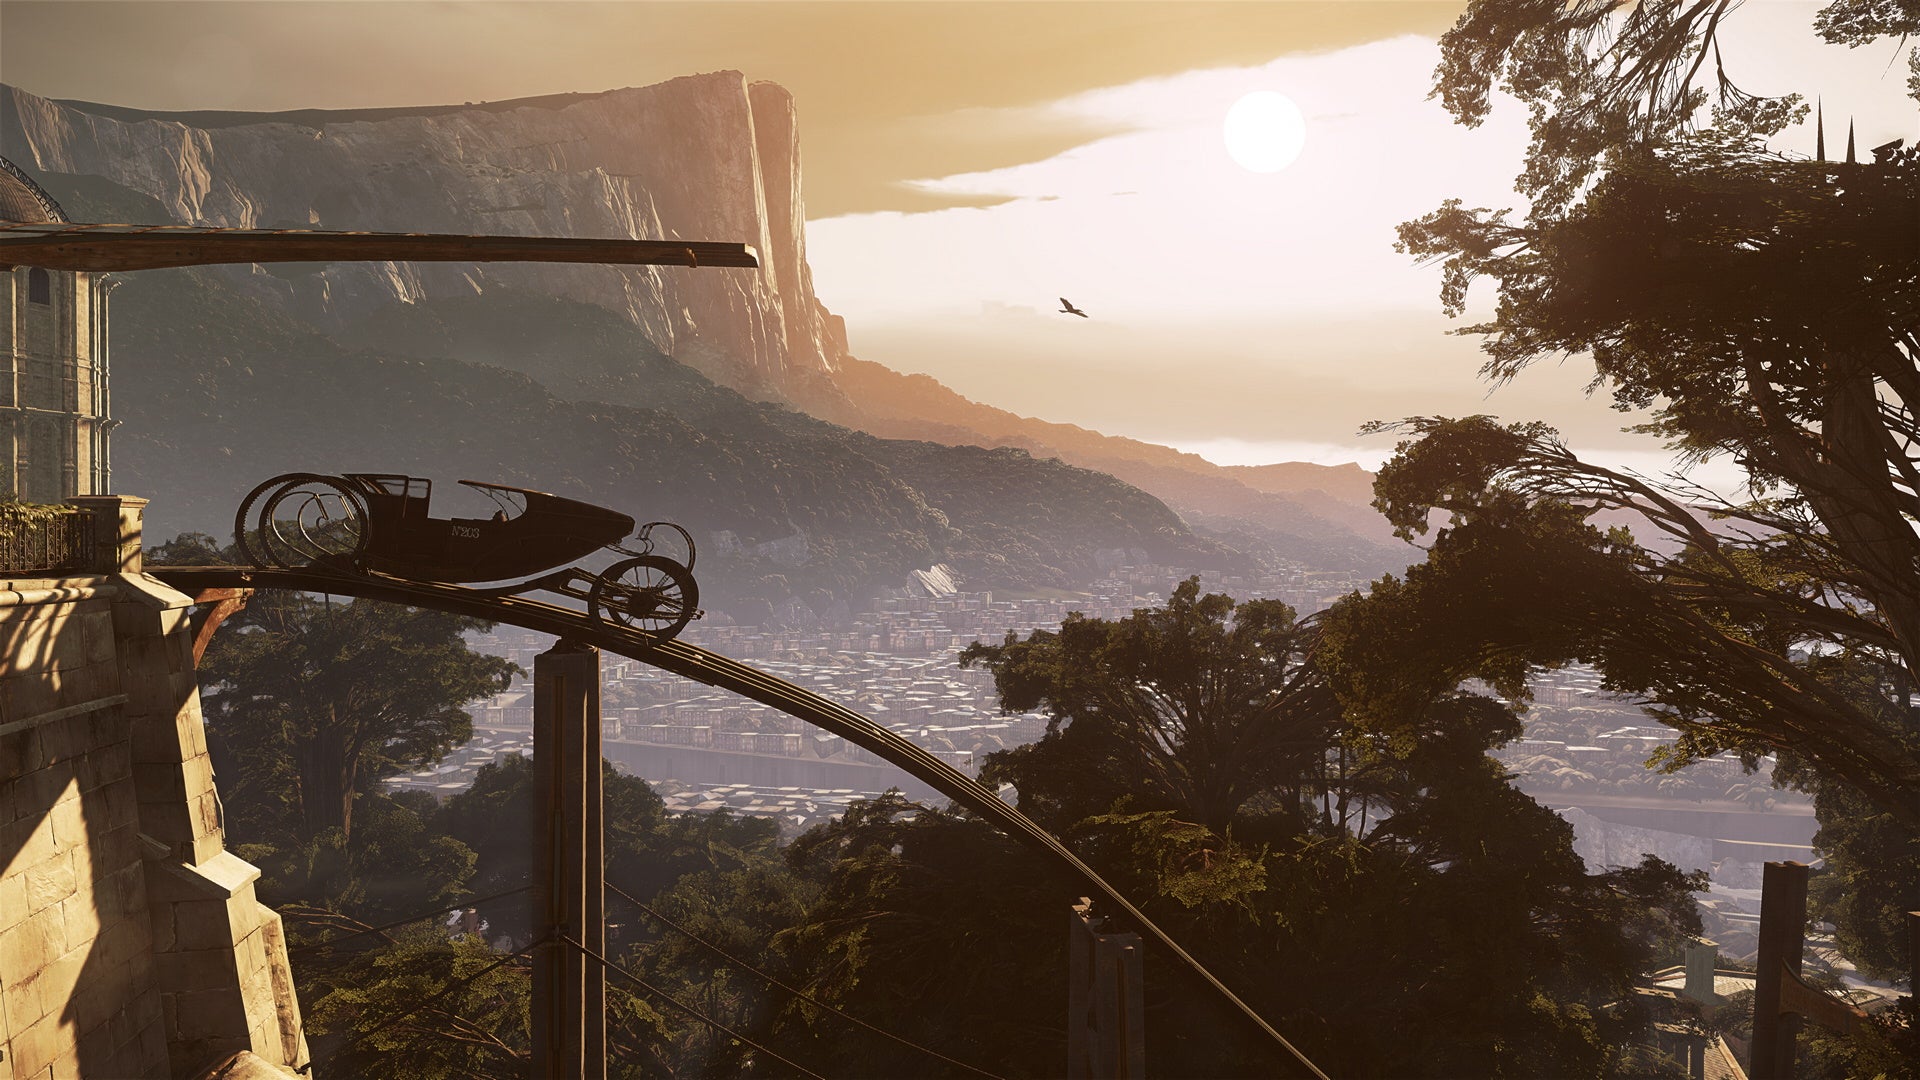 An image of Dishonored 2, which shows a view of Karnaca at sunset. A rail car is parked to the left and out in the distance the city rests below forests and cliffs.